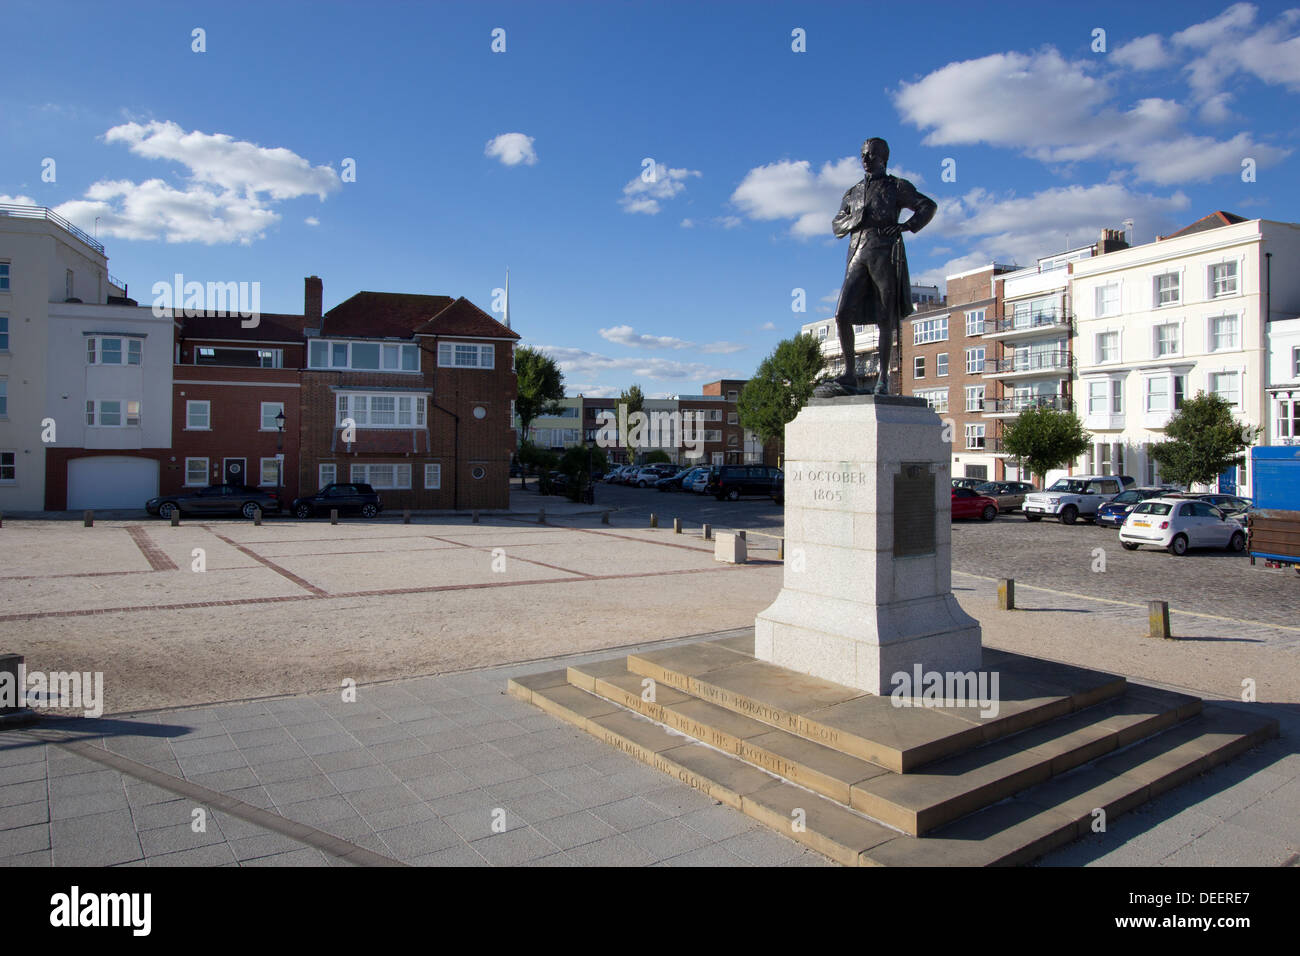 L'Horatio Nelson Monument in Grand Parade, Old Portsmouth, Hampshire UK Europe Foto Stock